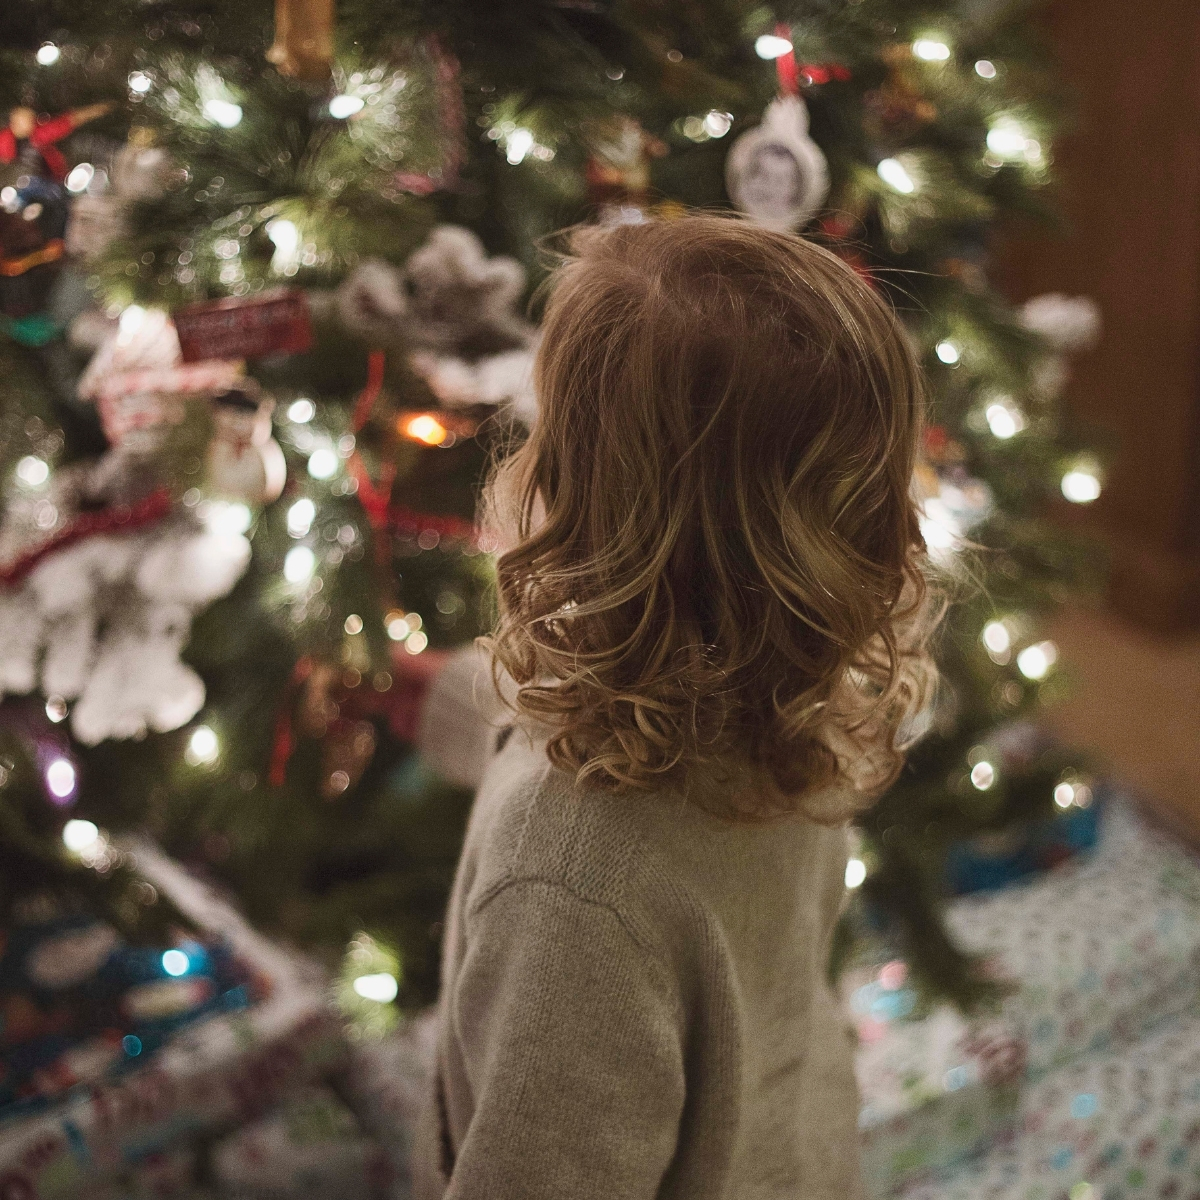 Little boy gazing at the Christmas tree